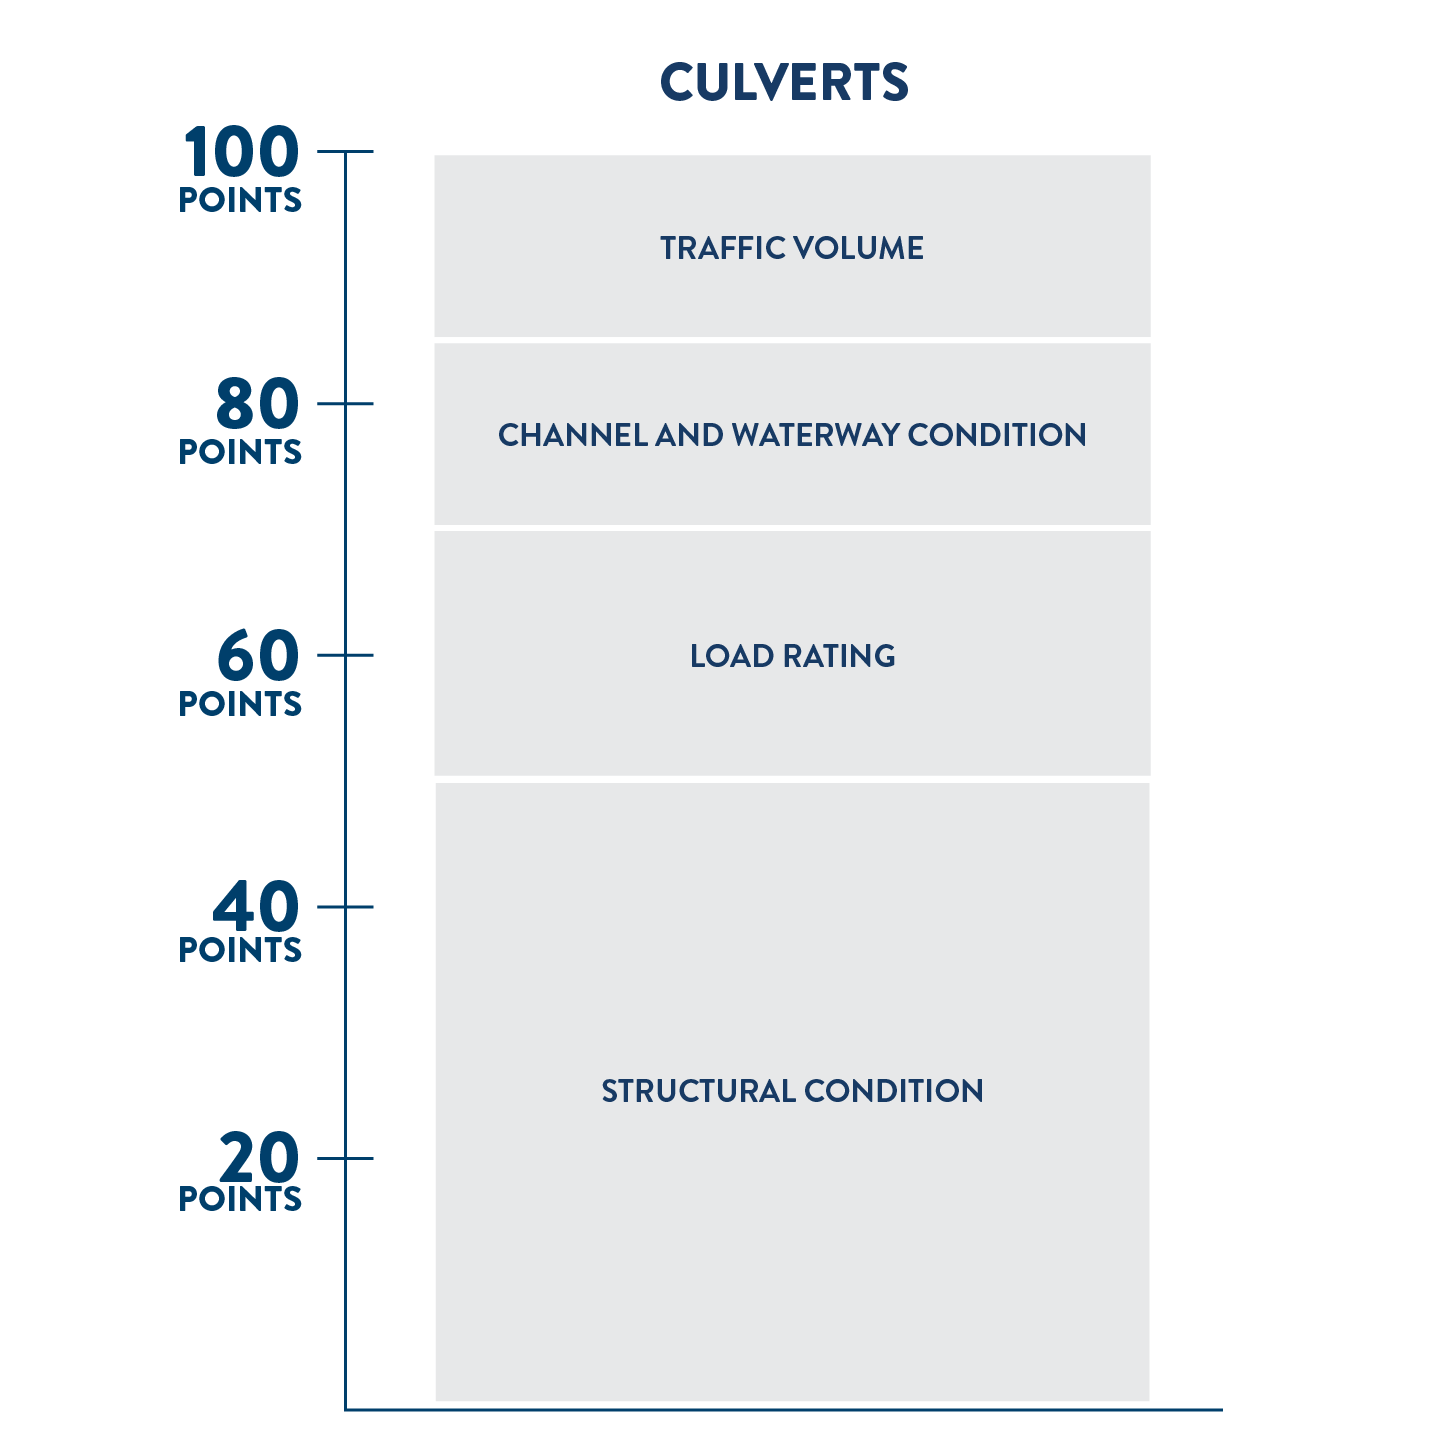 Scoring criteria for standalone national highway system culvert projects. Out of 100 possible points, 50 points are based on the structural condition of the culvert, 20 points are based on the load rating, 15 points are based on the condition of the waterway and channel, and 15 points are based traffic volume. 